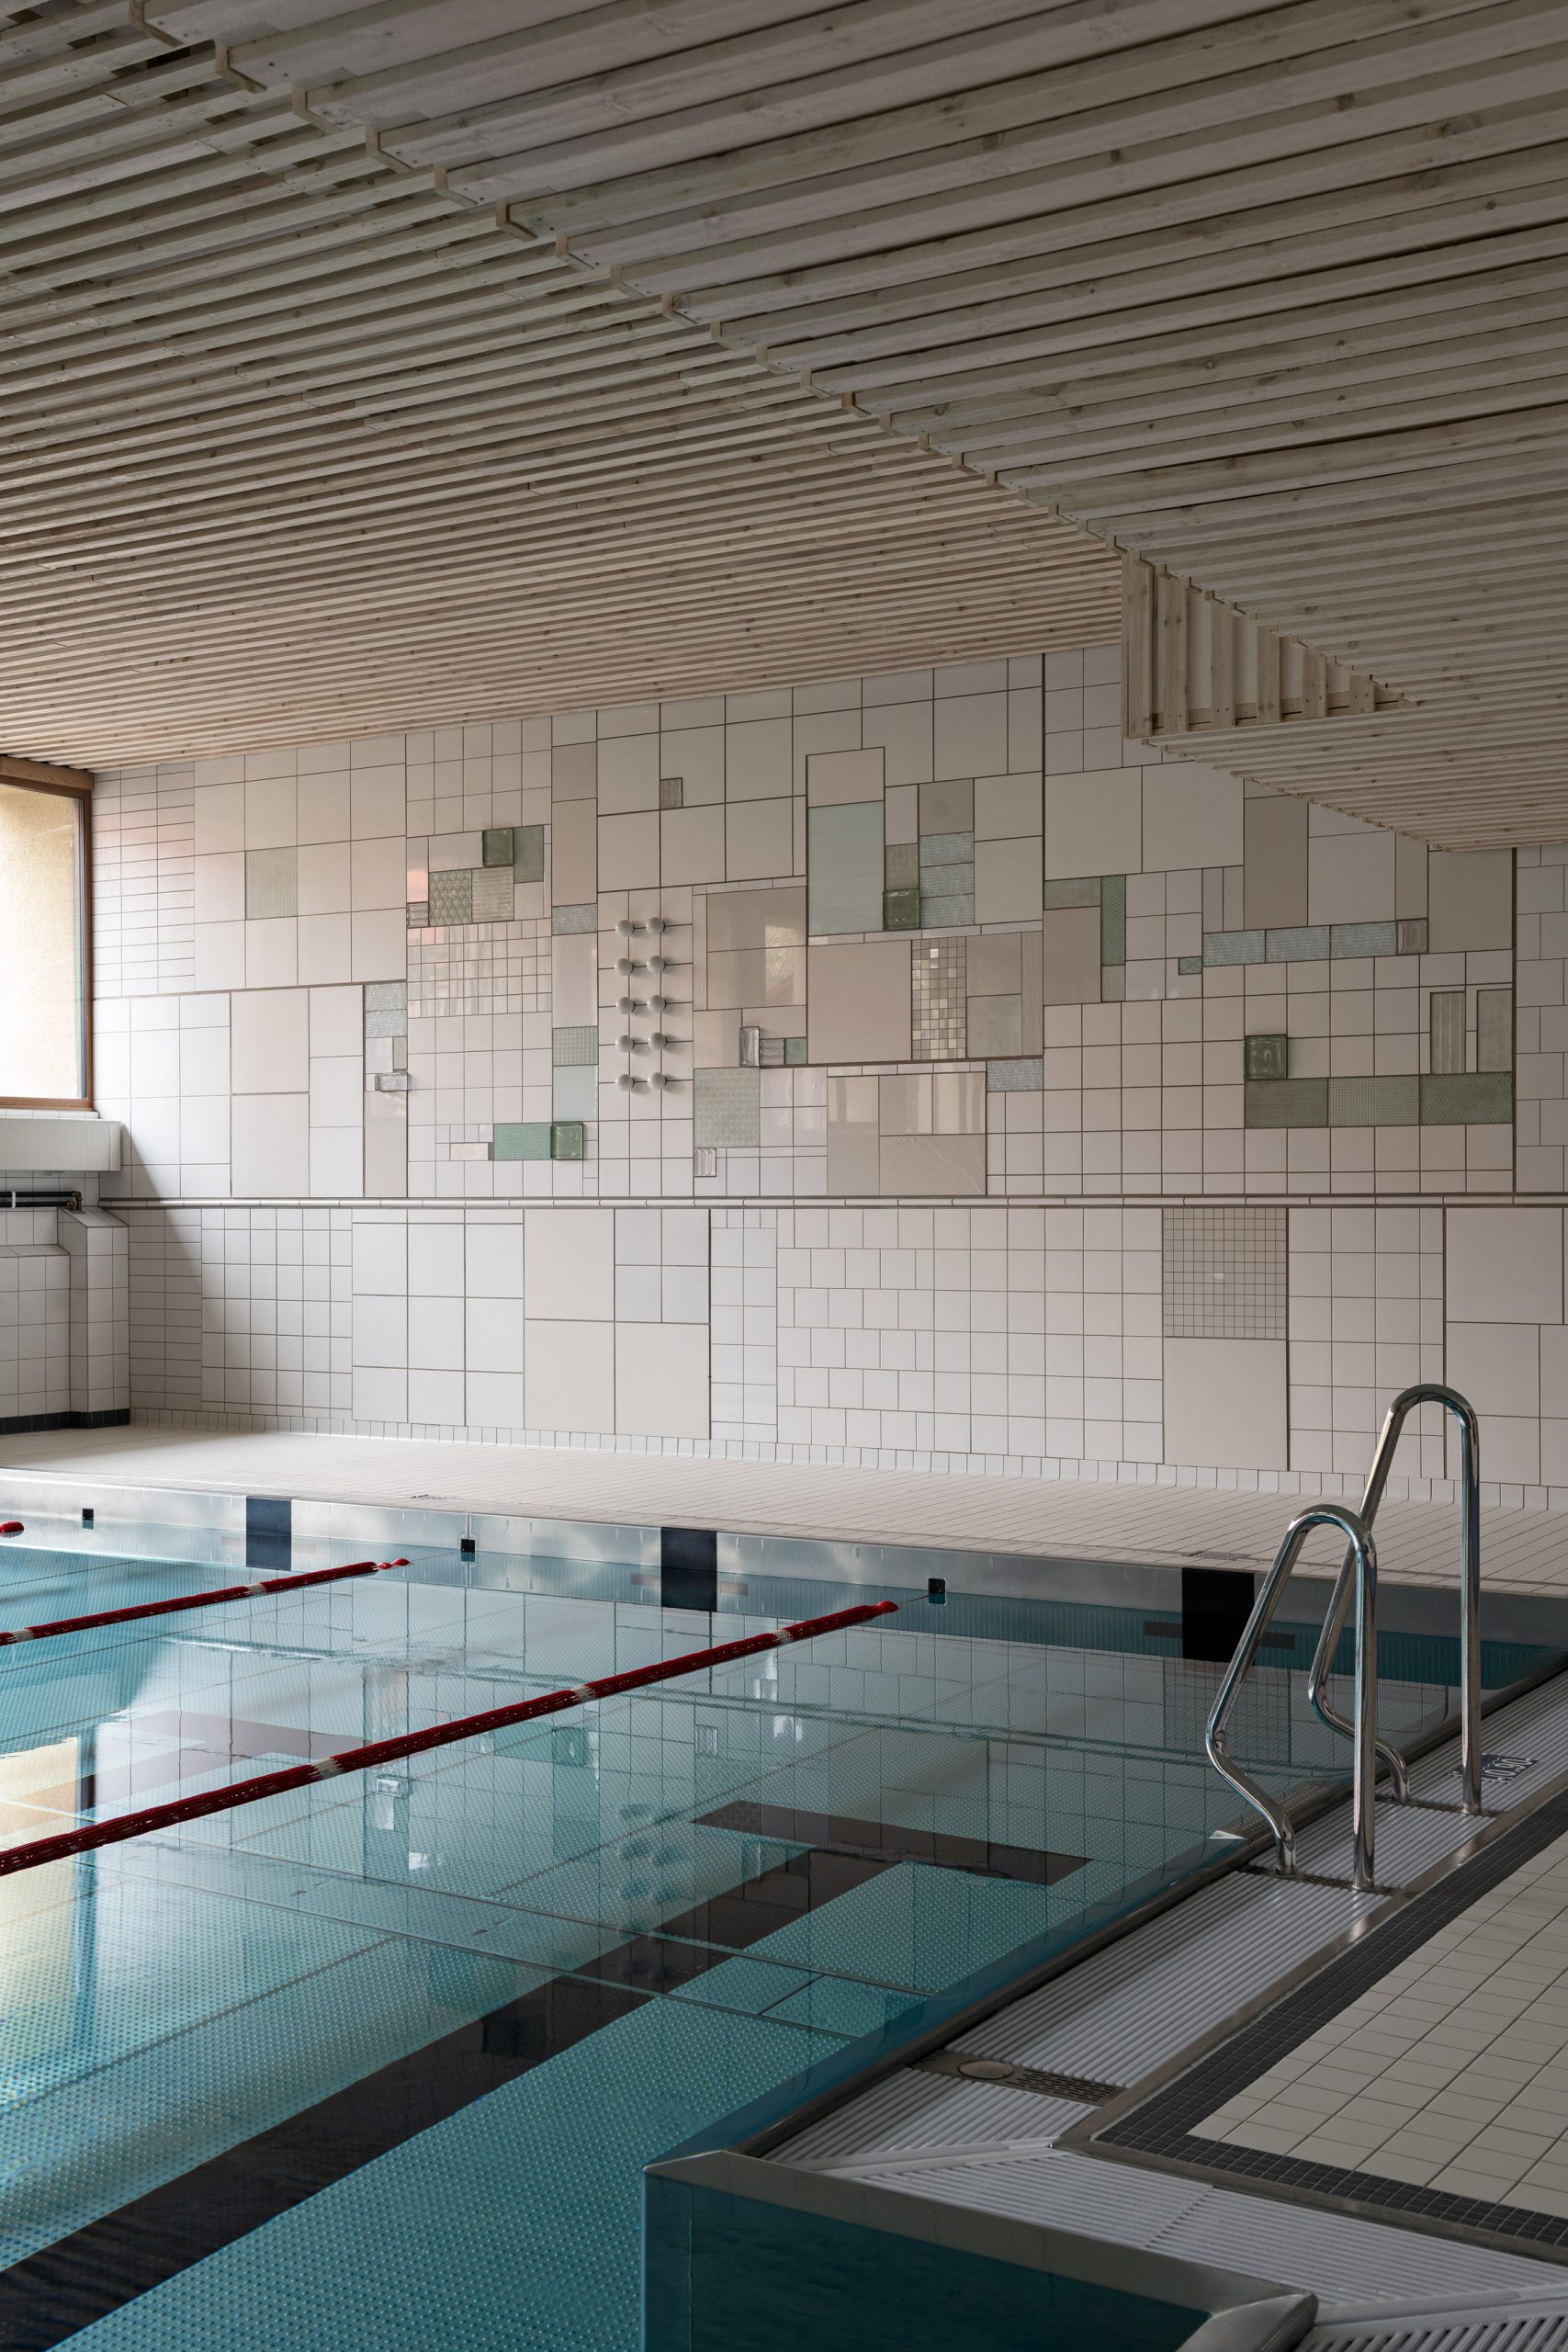 Swimming pool mural by Folkform